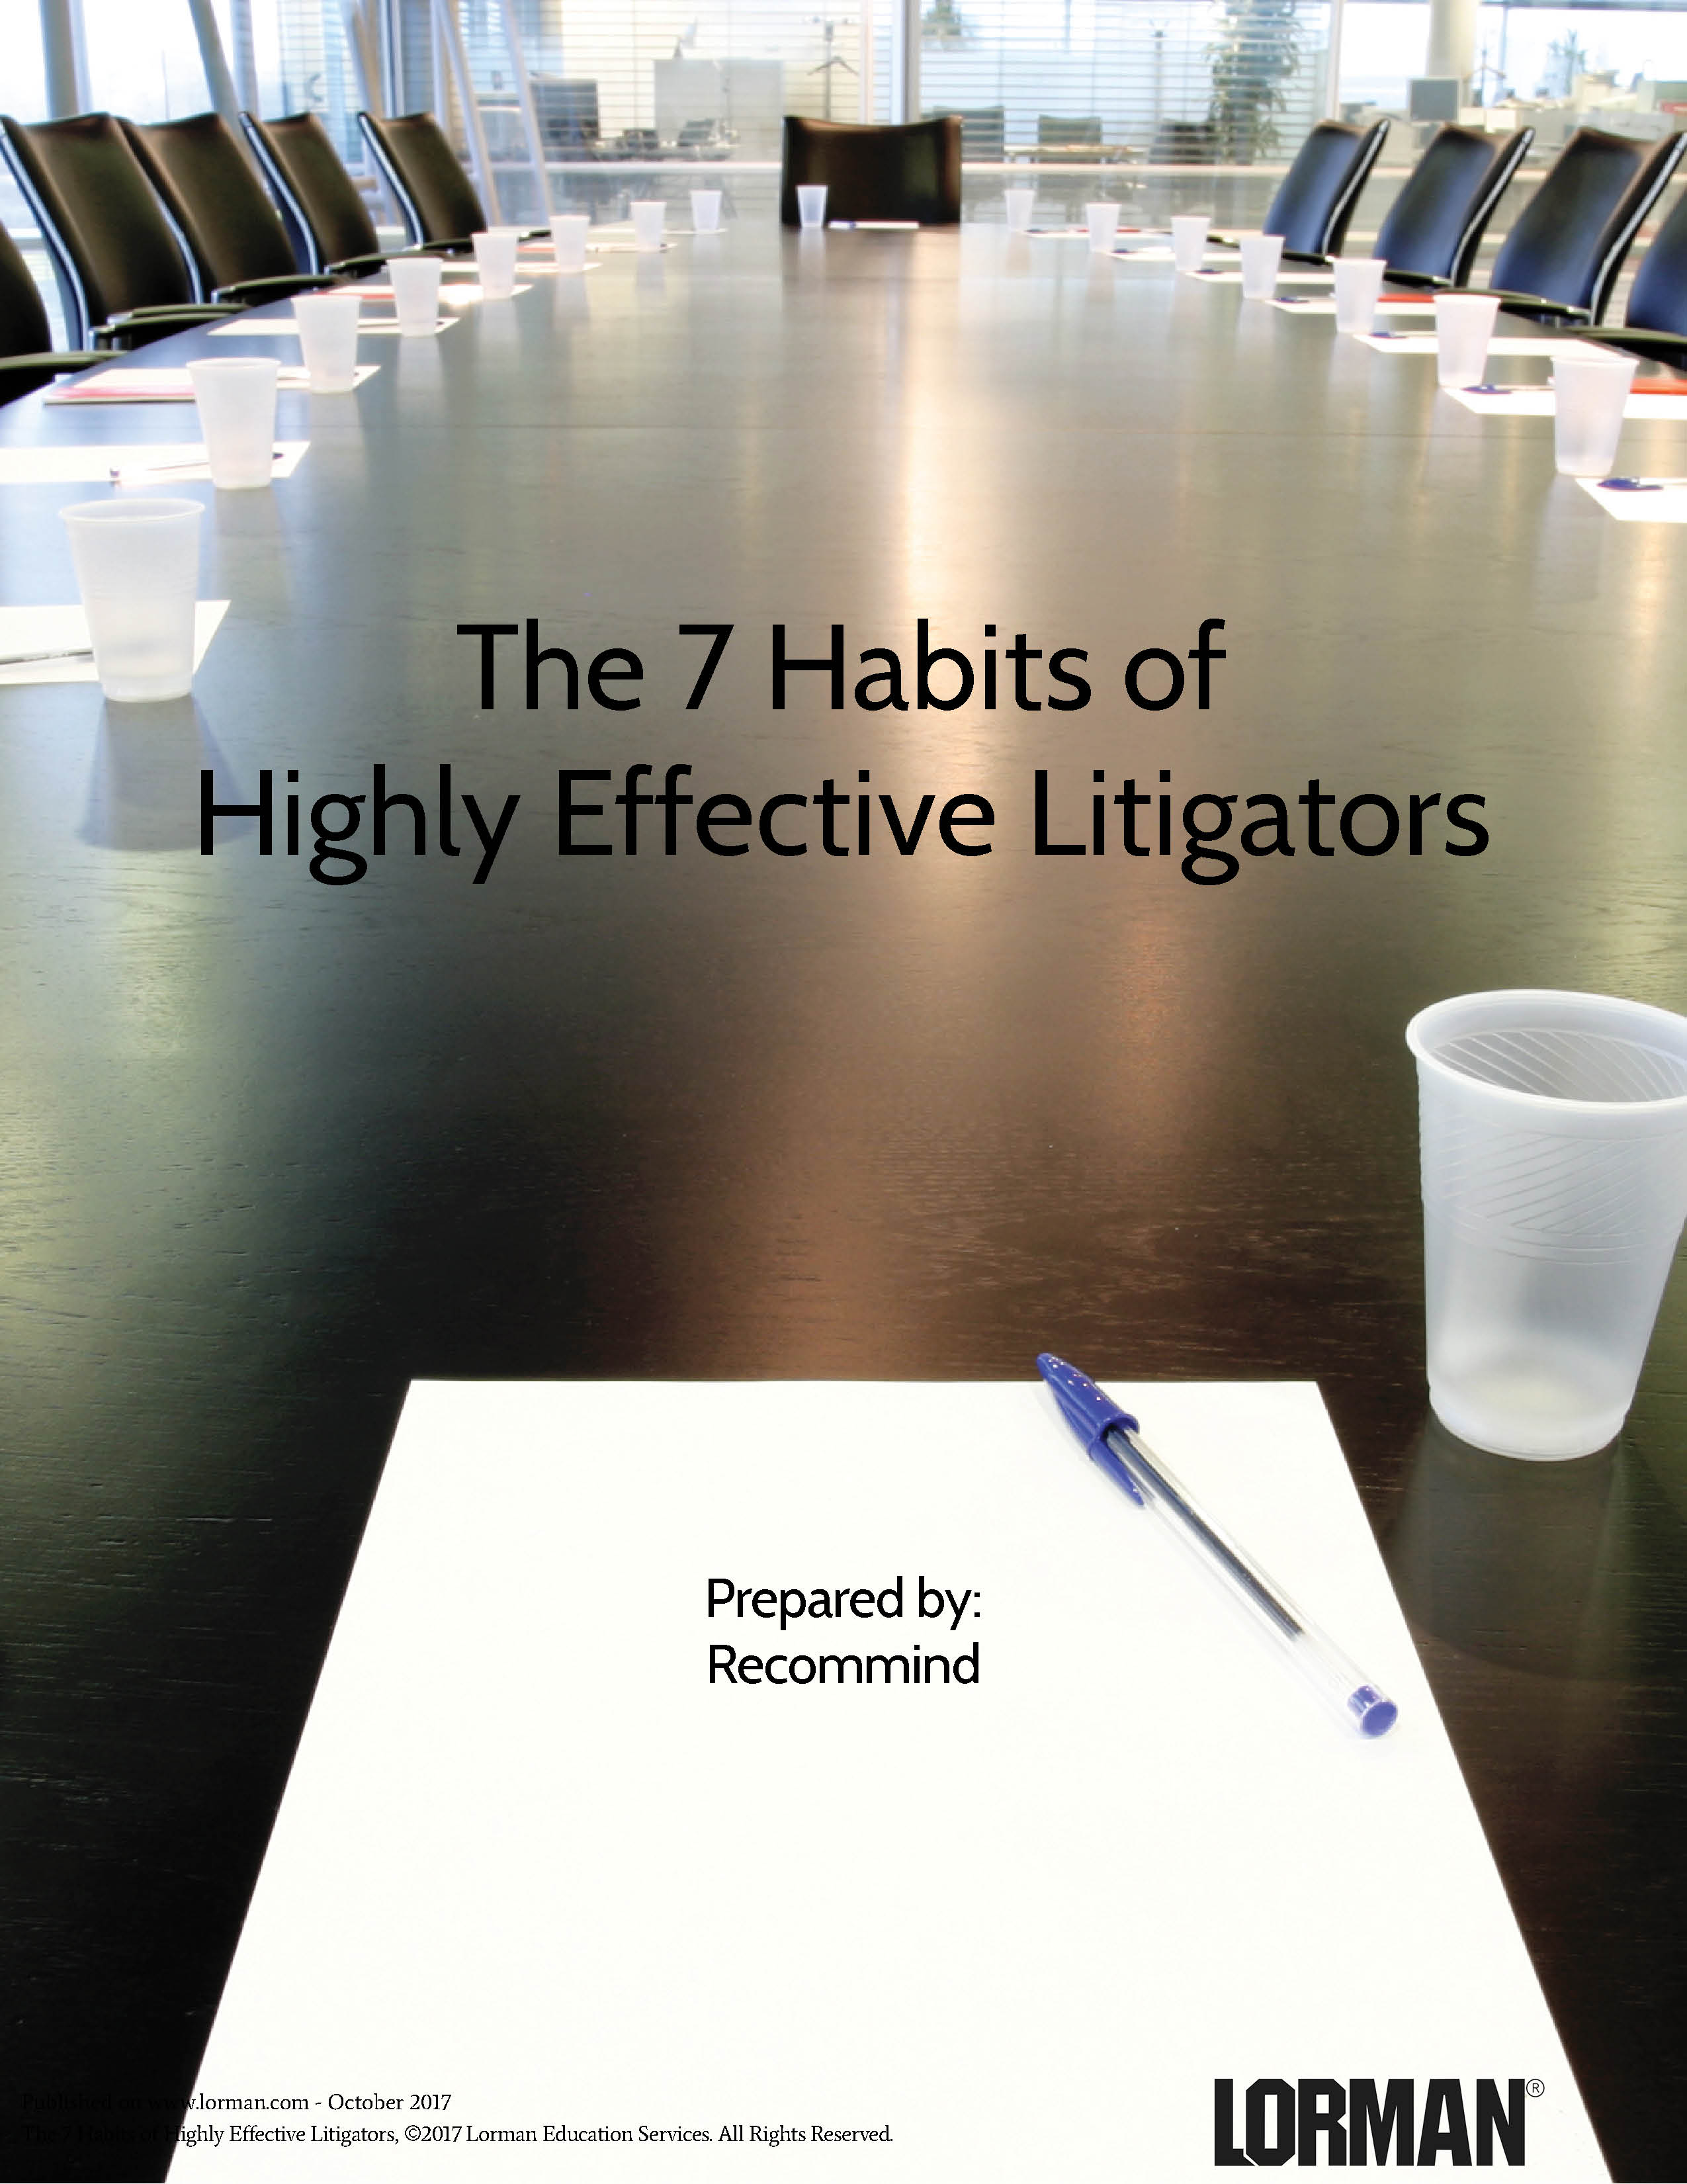 The 7 Habits of Highly Effective Litigators ... Who Aren't Really Wild About eDiscovery